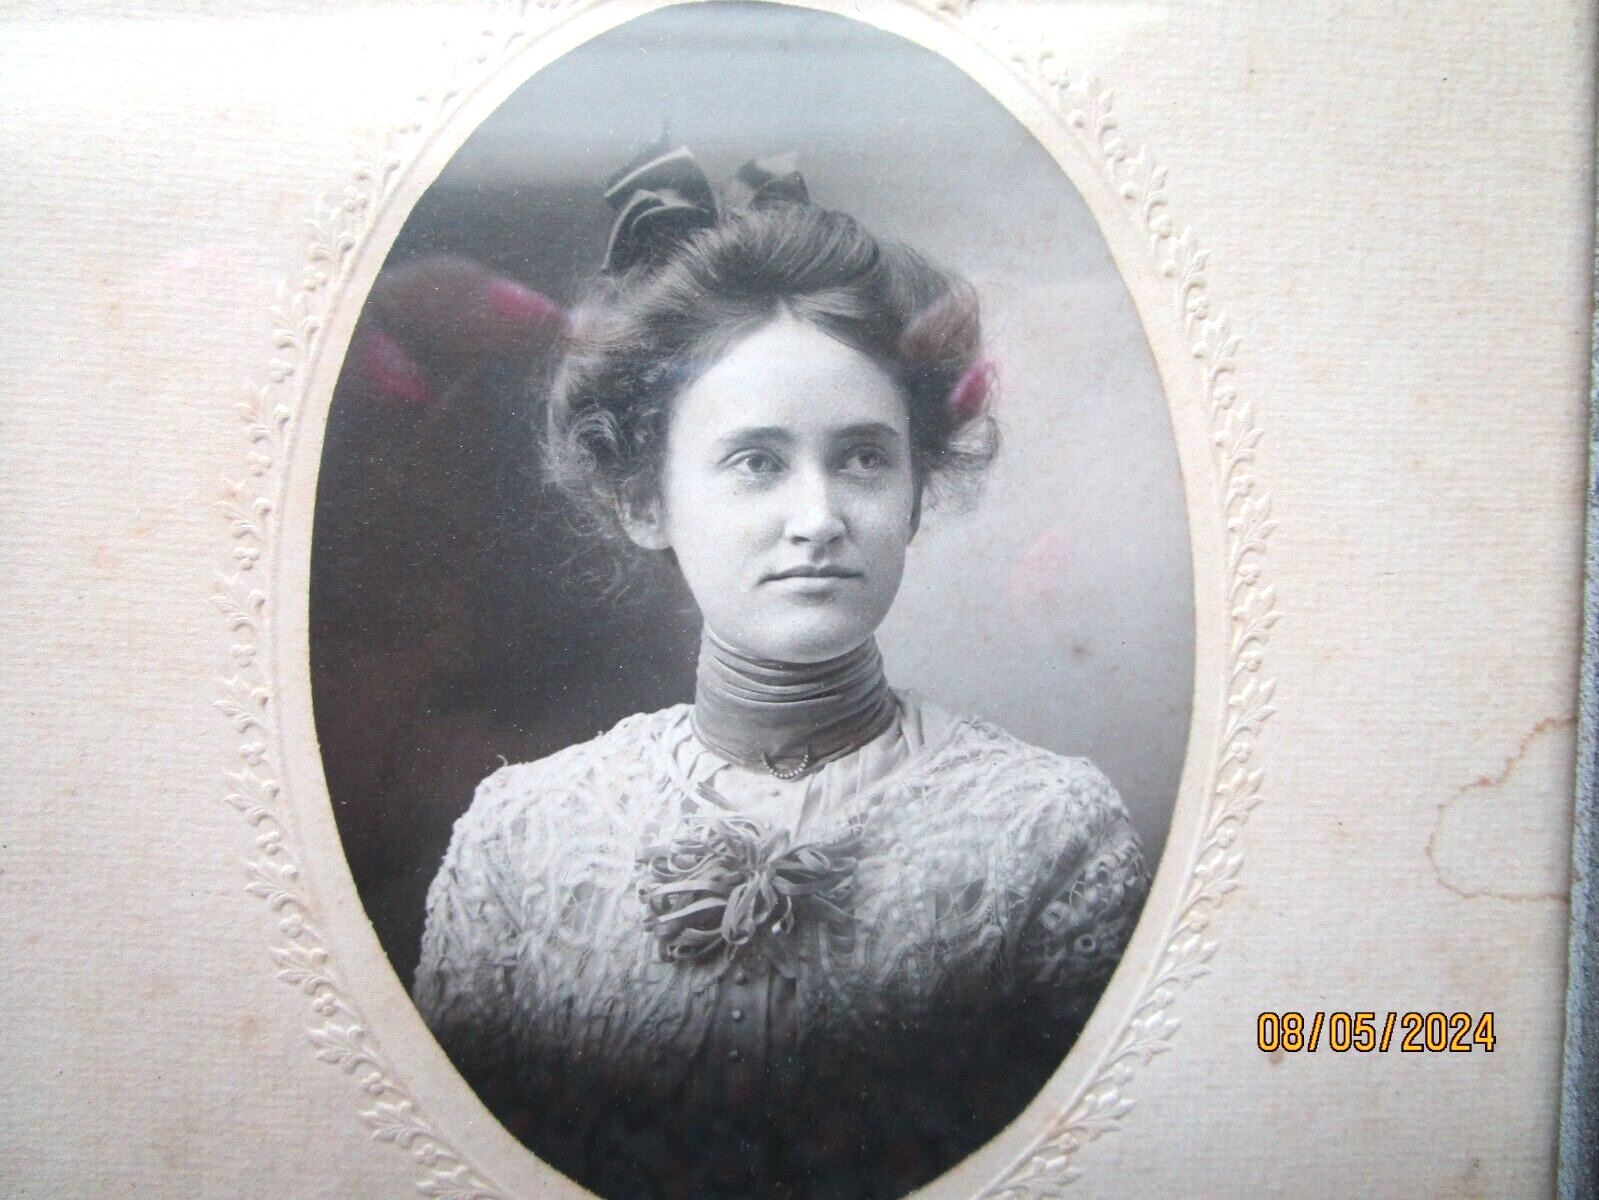 Antique Black & White Victorian Woman with Bows Photo Portrait in Frame